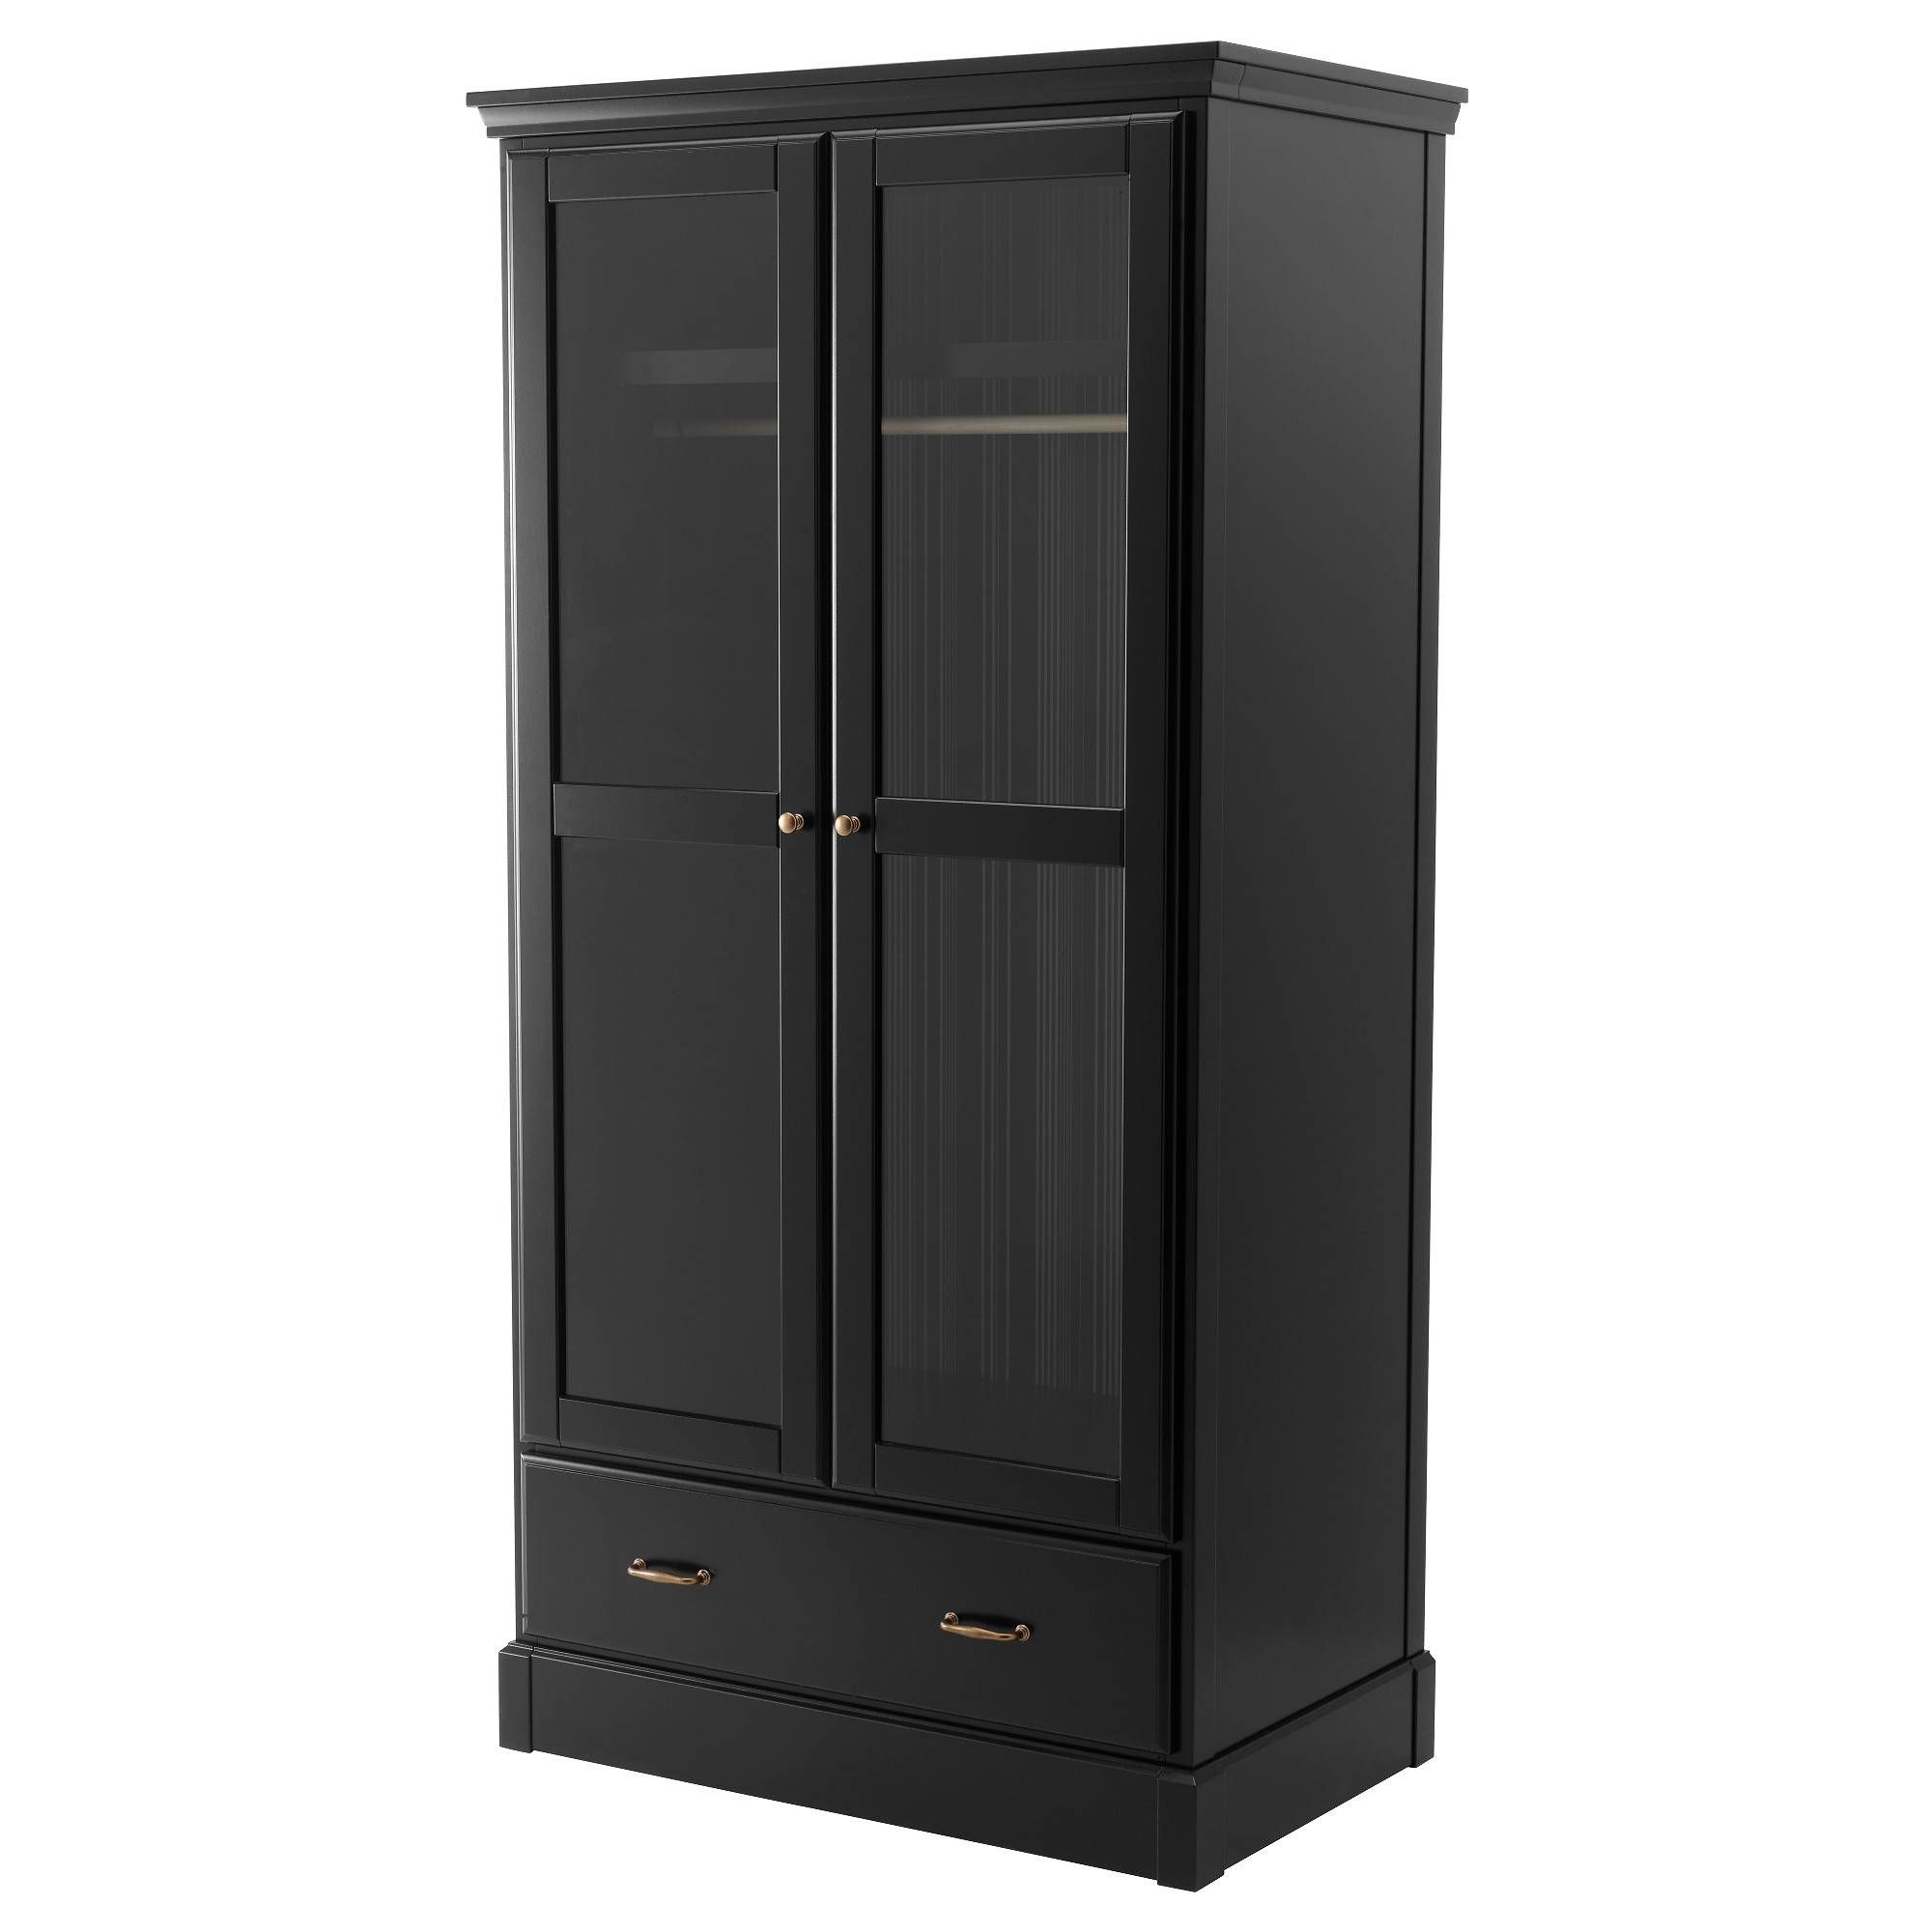 Wardrobes, Armoires & Closets – Ikea In Black Wardrobes (View 12 of 15)